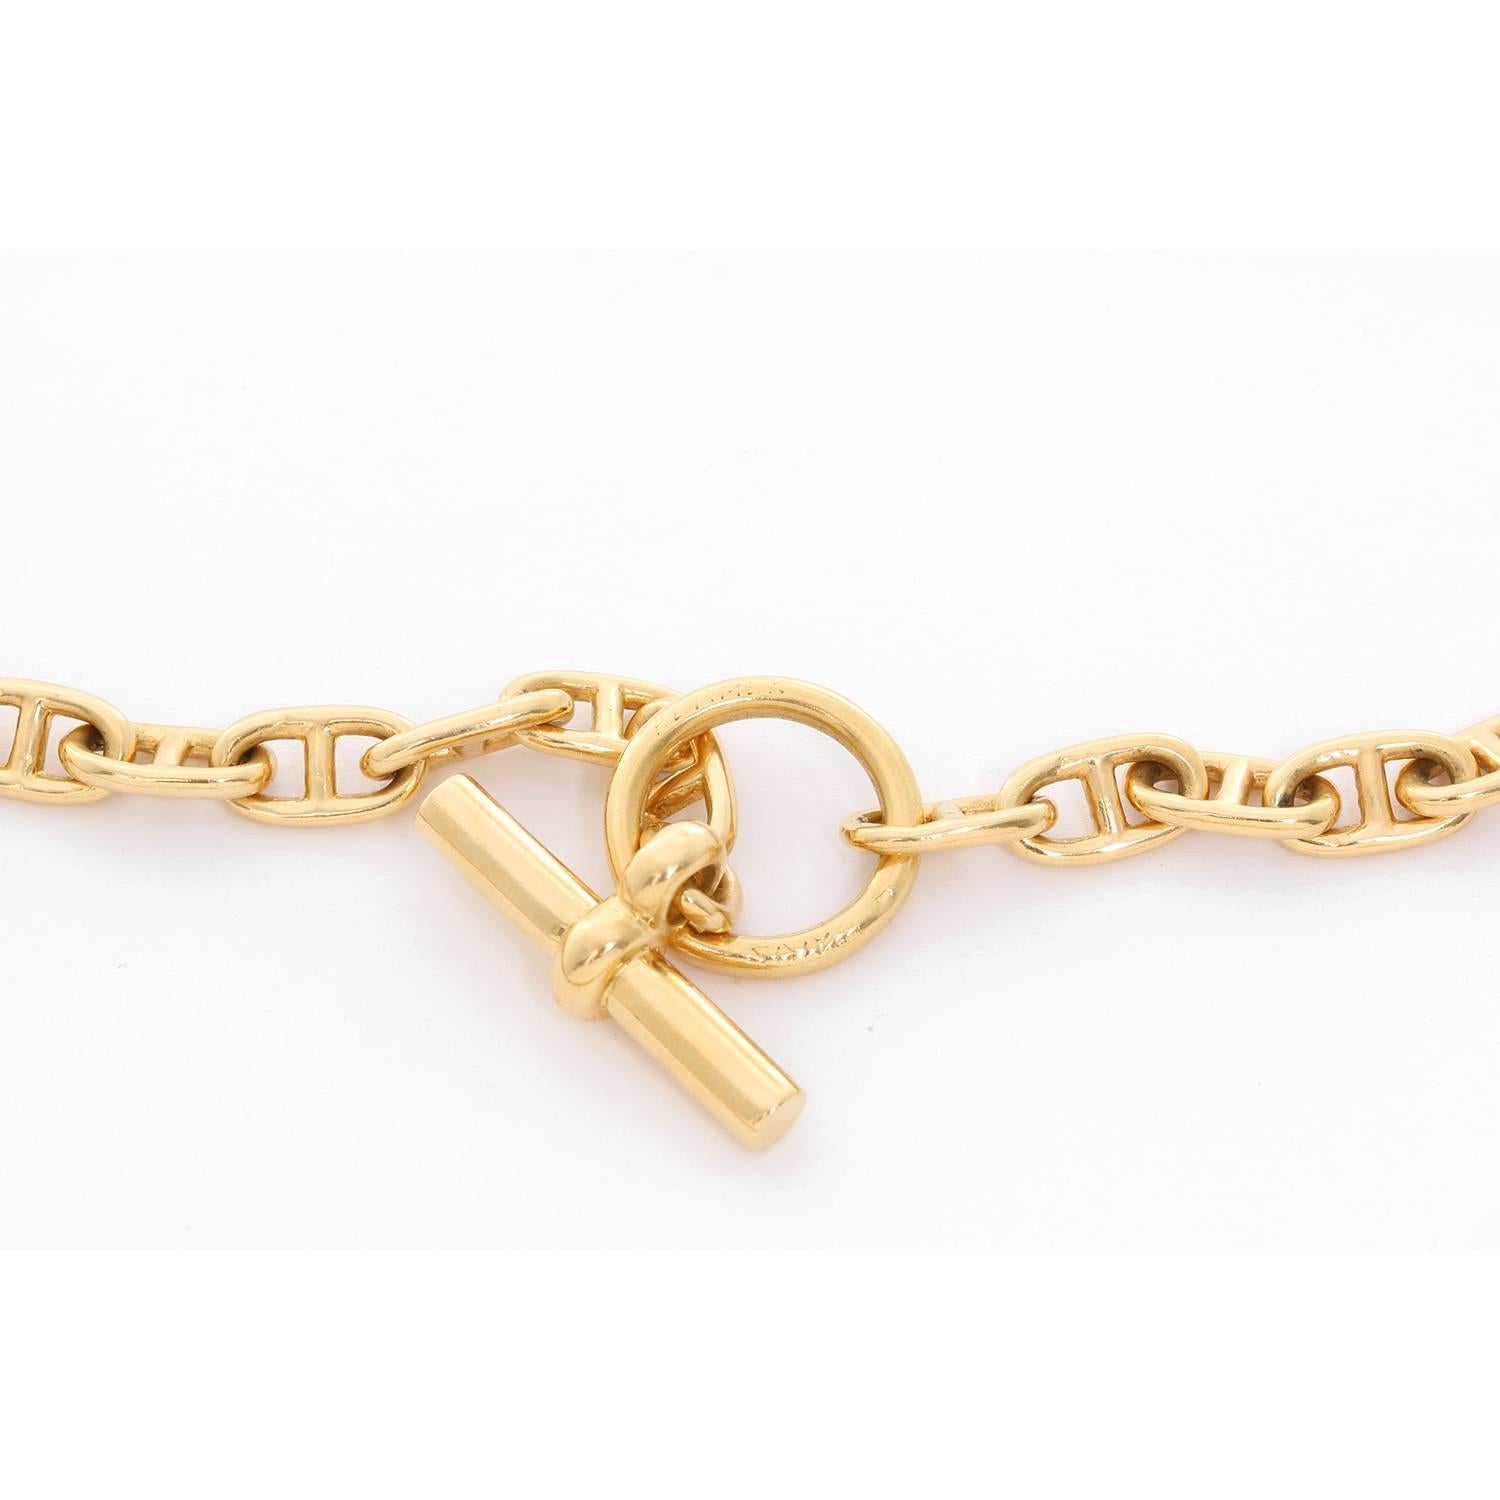 Hermes Chaine D'Ancre 18K Yellow Gold Necklace  - Chain necklace length 16.9 inches. Total weight 88.6 grams. Beautiful for any day of the week!